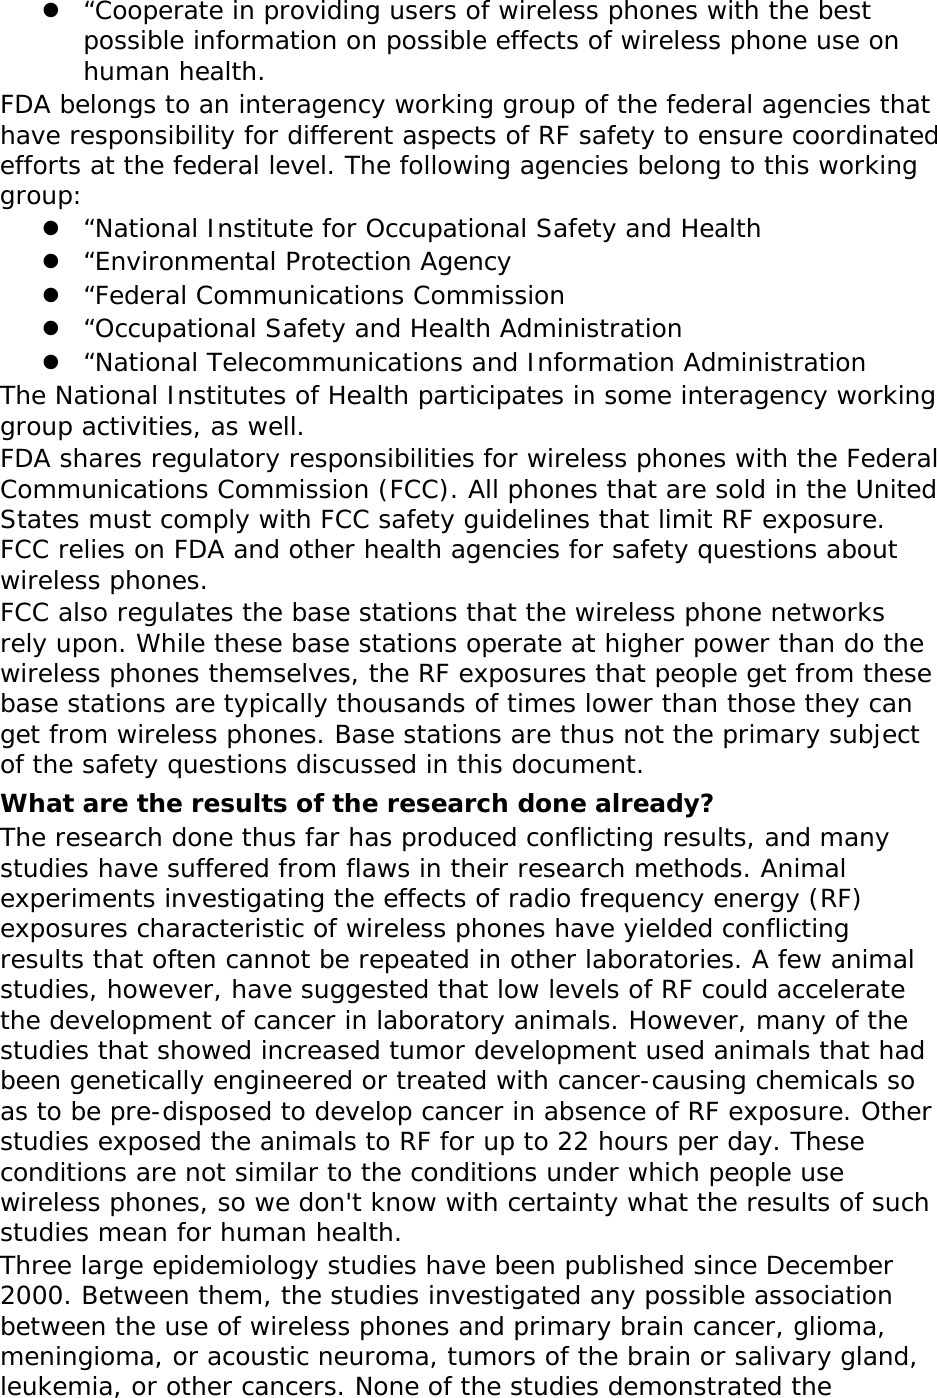  “Cooperate in providing users of wireless phones with the best possible information on possible effects of wireless phone use on human health. FDA belongs to an interagency working group of the federal agencies that have responsibility for different aspects of RF safety to ensure coordinated efforts at the federal level. The following agencies belong to this working group:  “National Institute for Occupational Safety and Health  “Environmental Protection Agency  “Federal Communications Commission  “Occupational Safety and Health Administration  “National Telecommunications and Information Administration The National Institutes of Health participates in some interagency working group activities, as well. FDA shares regulatory responsibilities for wireless phones with the Federal Communications Commission (FCC). All phones that are sold in the United States must comply with FCC safety guidelines that limit RF exposure. FCC relies on FDA and other health agencies for safety questions about wireless phones. FCC also regulates the base stations that the wireless phone networks rely upon. While these base stations operate at higher power than do the wireless phones themselves, the RF exposures that people get from these base stations are typically thousands of times lower than those they can get from wireless phones. Base stations are thus not the primary subject of the safety questions discussed in this document. What are the results of the research done already? The research done thus far has produced conflicting results, and many studies have suffered from flaws in their research methods. Animal experiments investigating the effects of radio frequency energy (RF) exposures characteristic of wireless phones have yielded conflicting results that often cannot be repeated in other laboratories. A few animal studies, however, have suggested that low levels of RF could accelerate the development of cancer in laboratory animals. However, many of the studies that showed increased tumor development used animals that had been genetically engineered or treated with cancer-causing chemicals so as to be pre-disposed to develop cancer in absence of RF exposure. Other studies exposed the animals to RF for up to 22 hours per day. These conditions are not similar to the conditions under which people use wireless phones, so we don&apos;t know with certainty what the results of such studies mean for human health. Three large epidemiology studies have been published since December 2000. Between them, the studies investigated any possible association between the use of wireless phones and primary brain cancer, glioma, meningioma, or acoustic neuroma, tumors of the brain or salivary gland, leukemia, or other cancers. None of the studies demonstrated the 